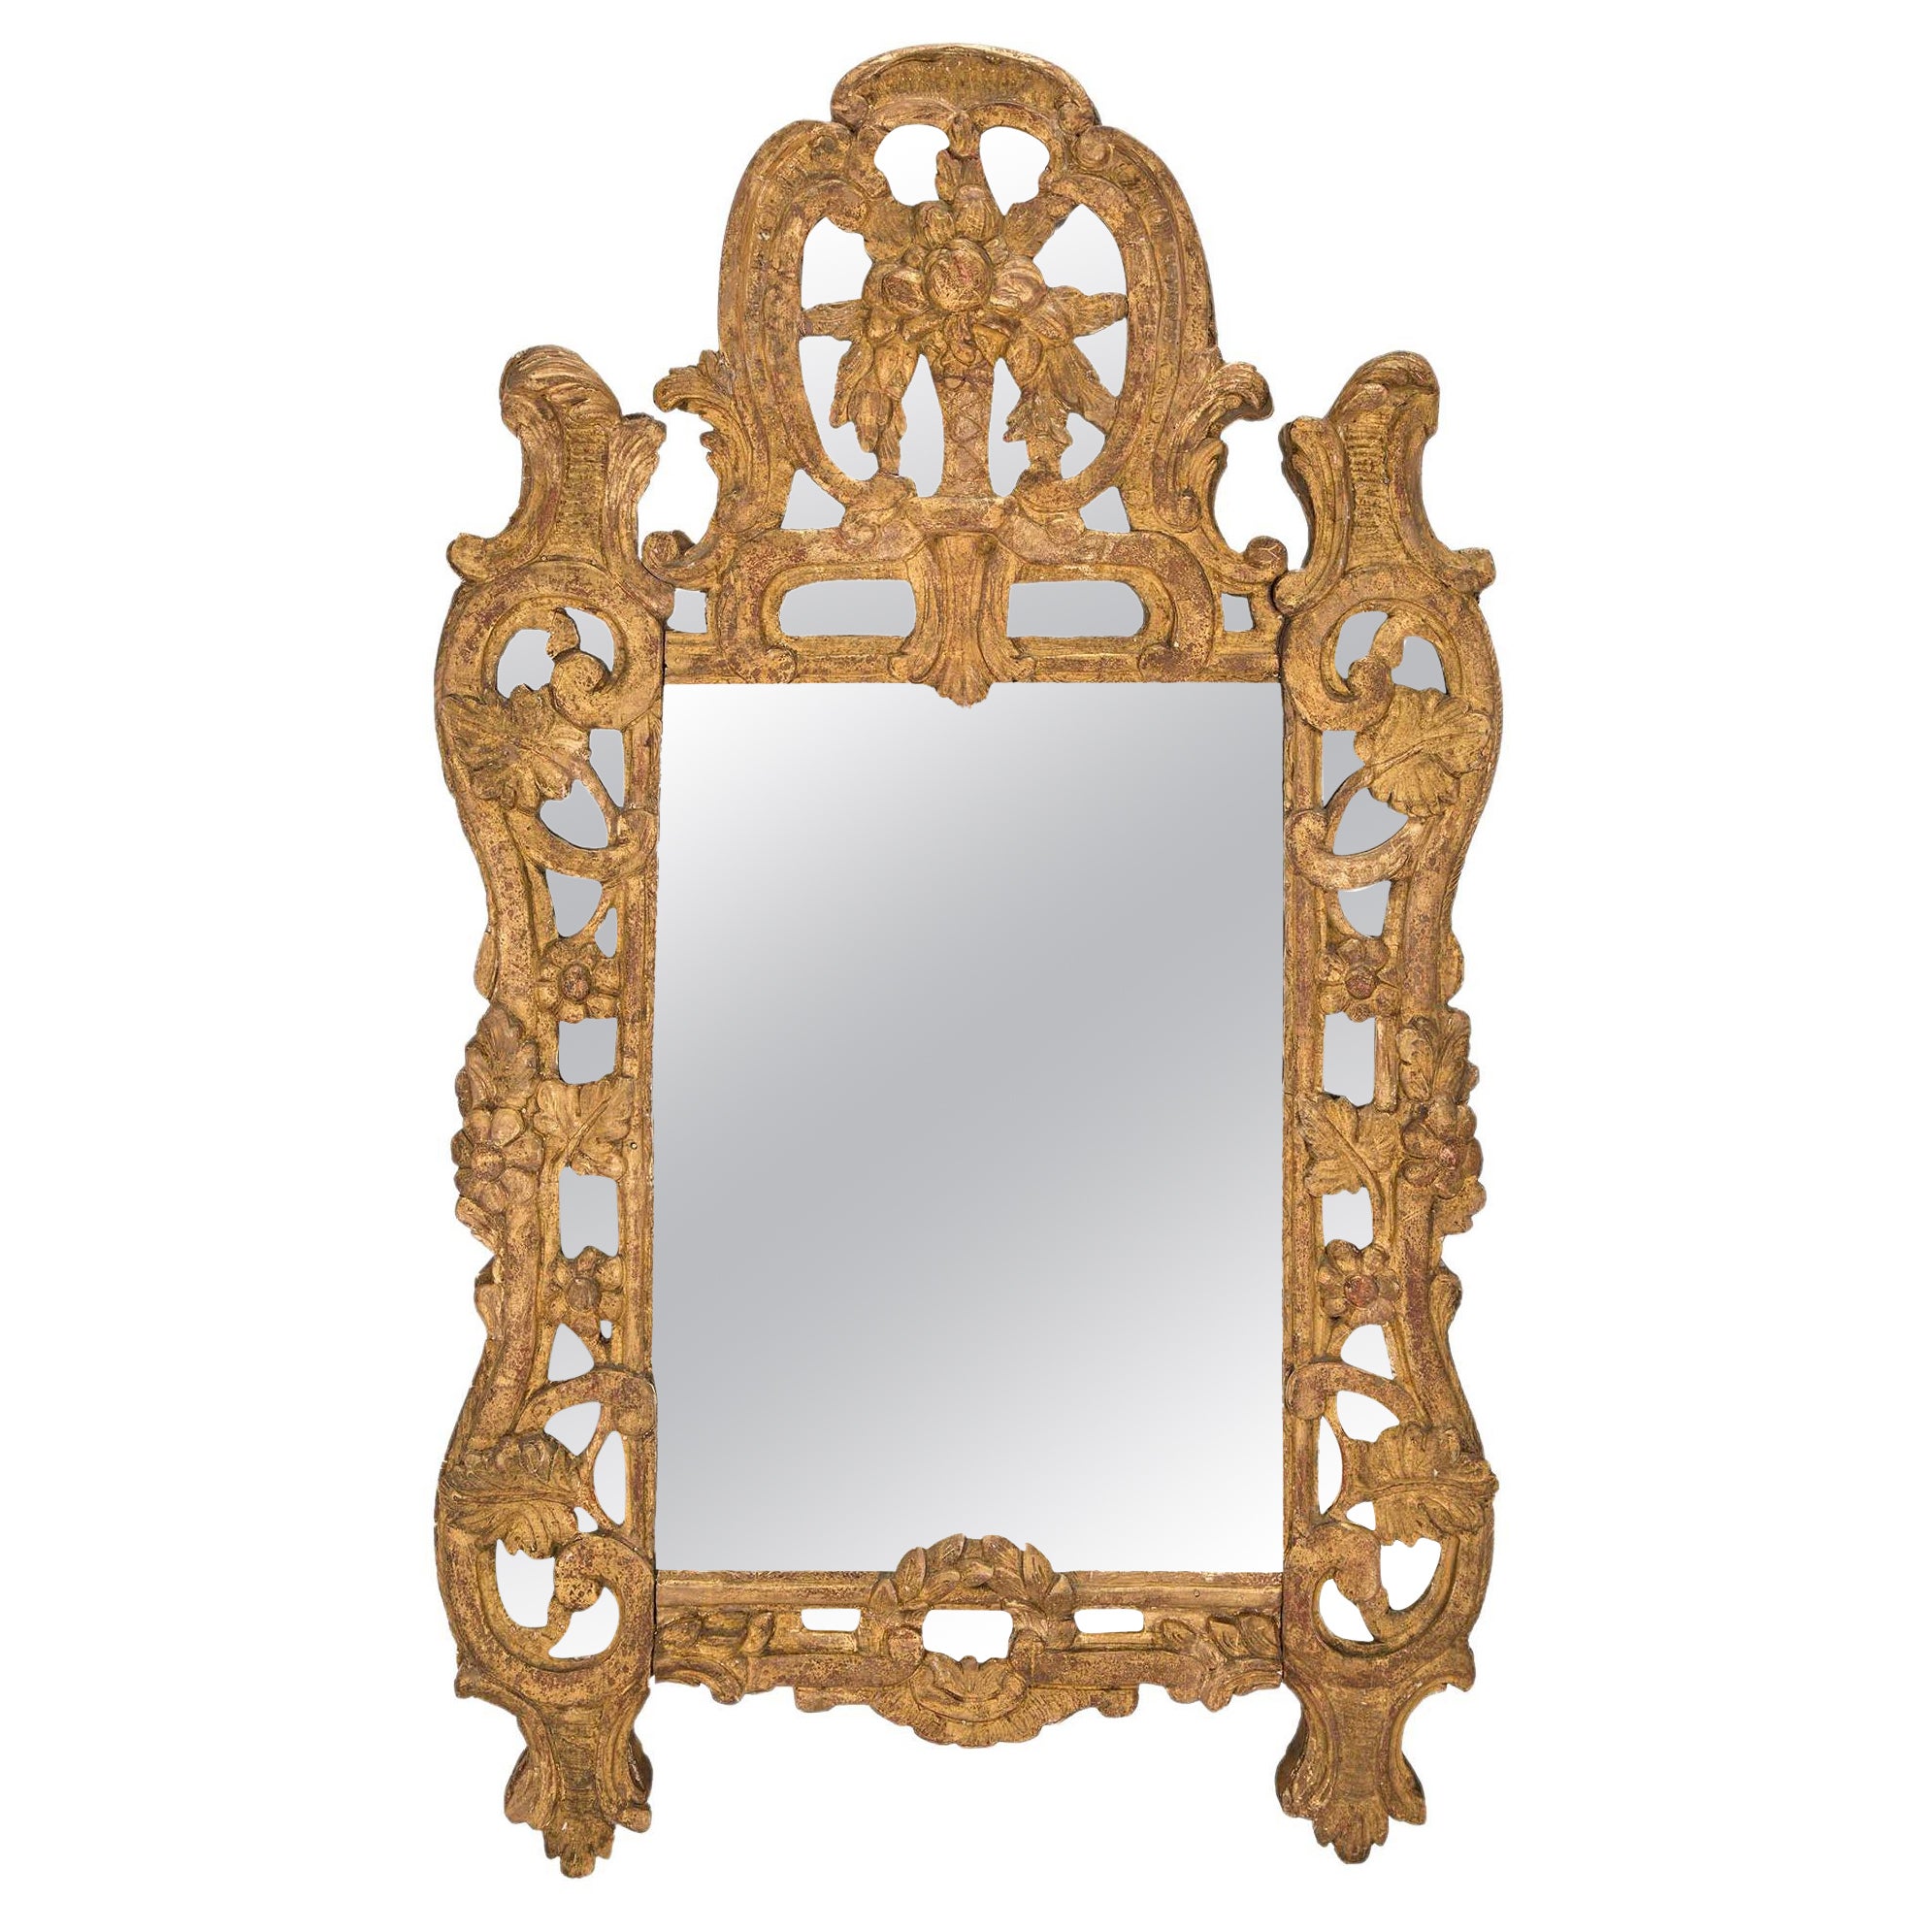 French 18th Century Régence Period Giltwood Mirror For Sale